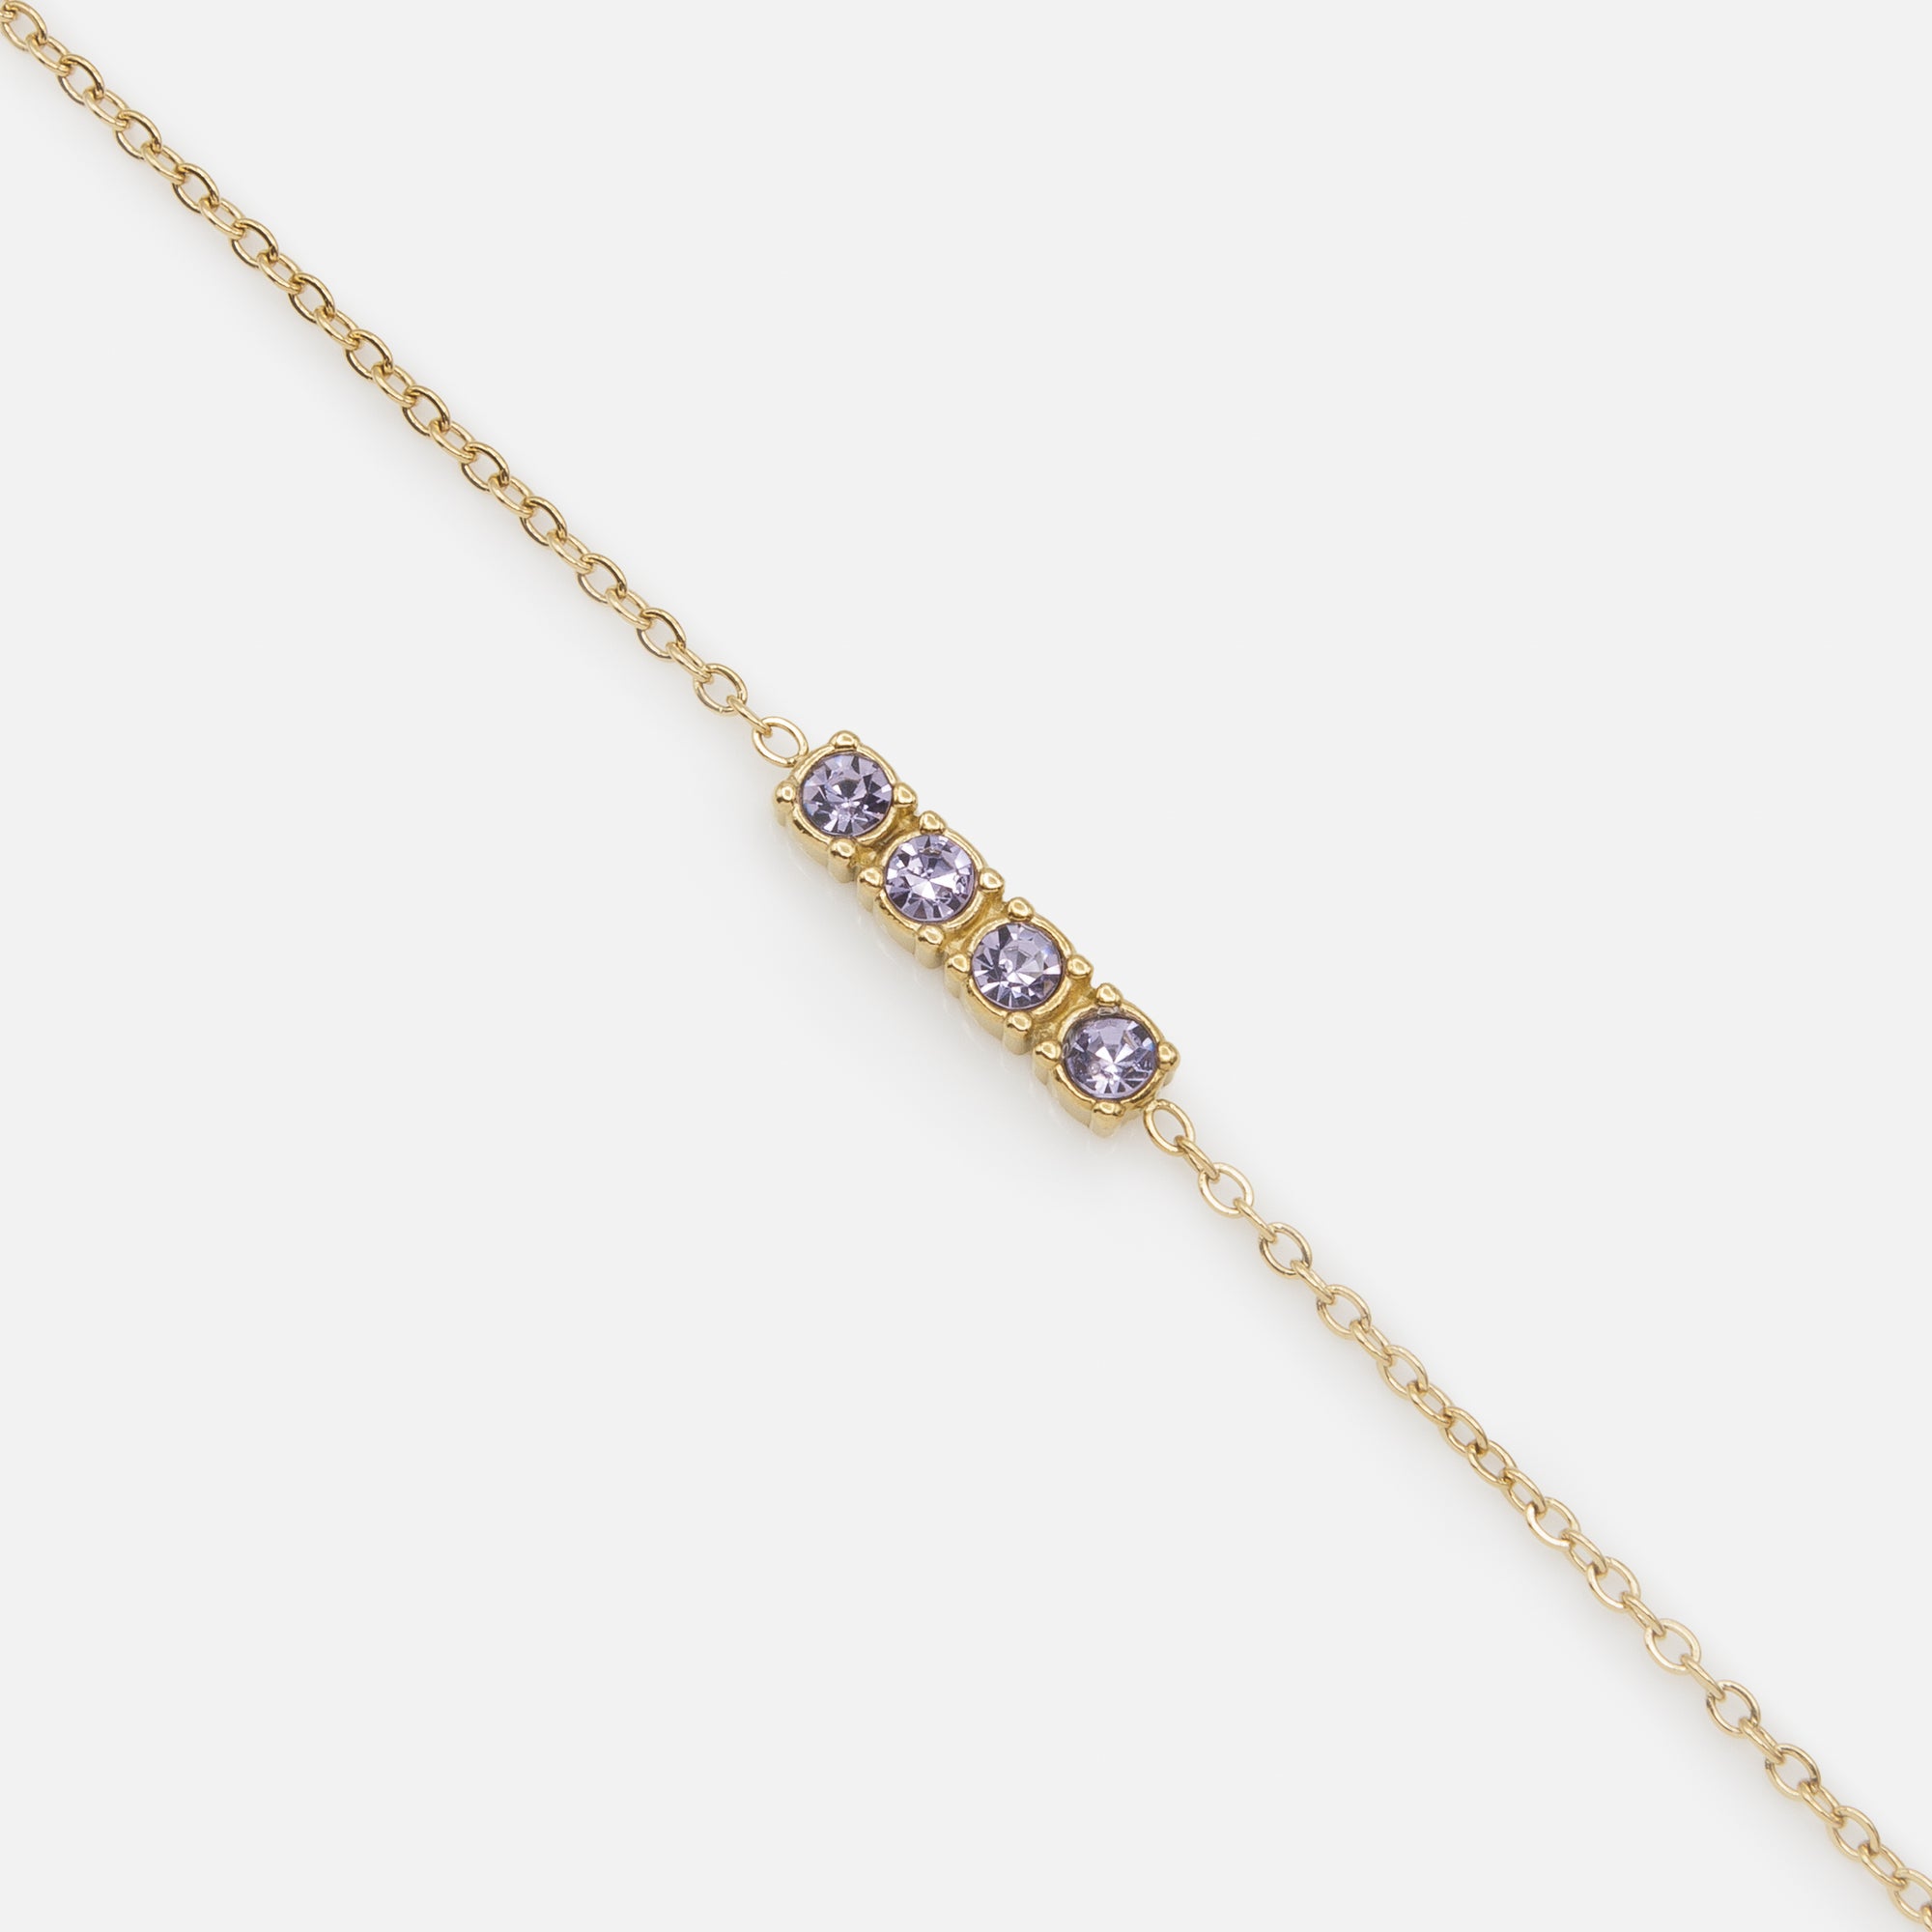 Golden bracelet and its quartet of purple cubic zirconia in stainless steel